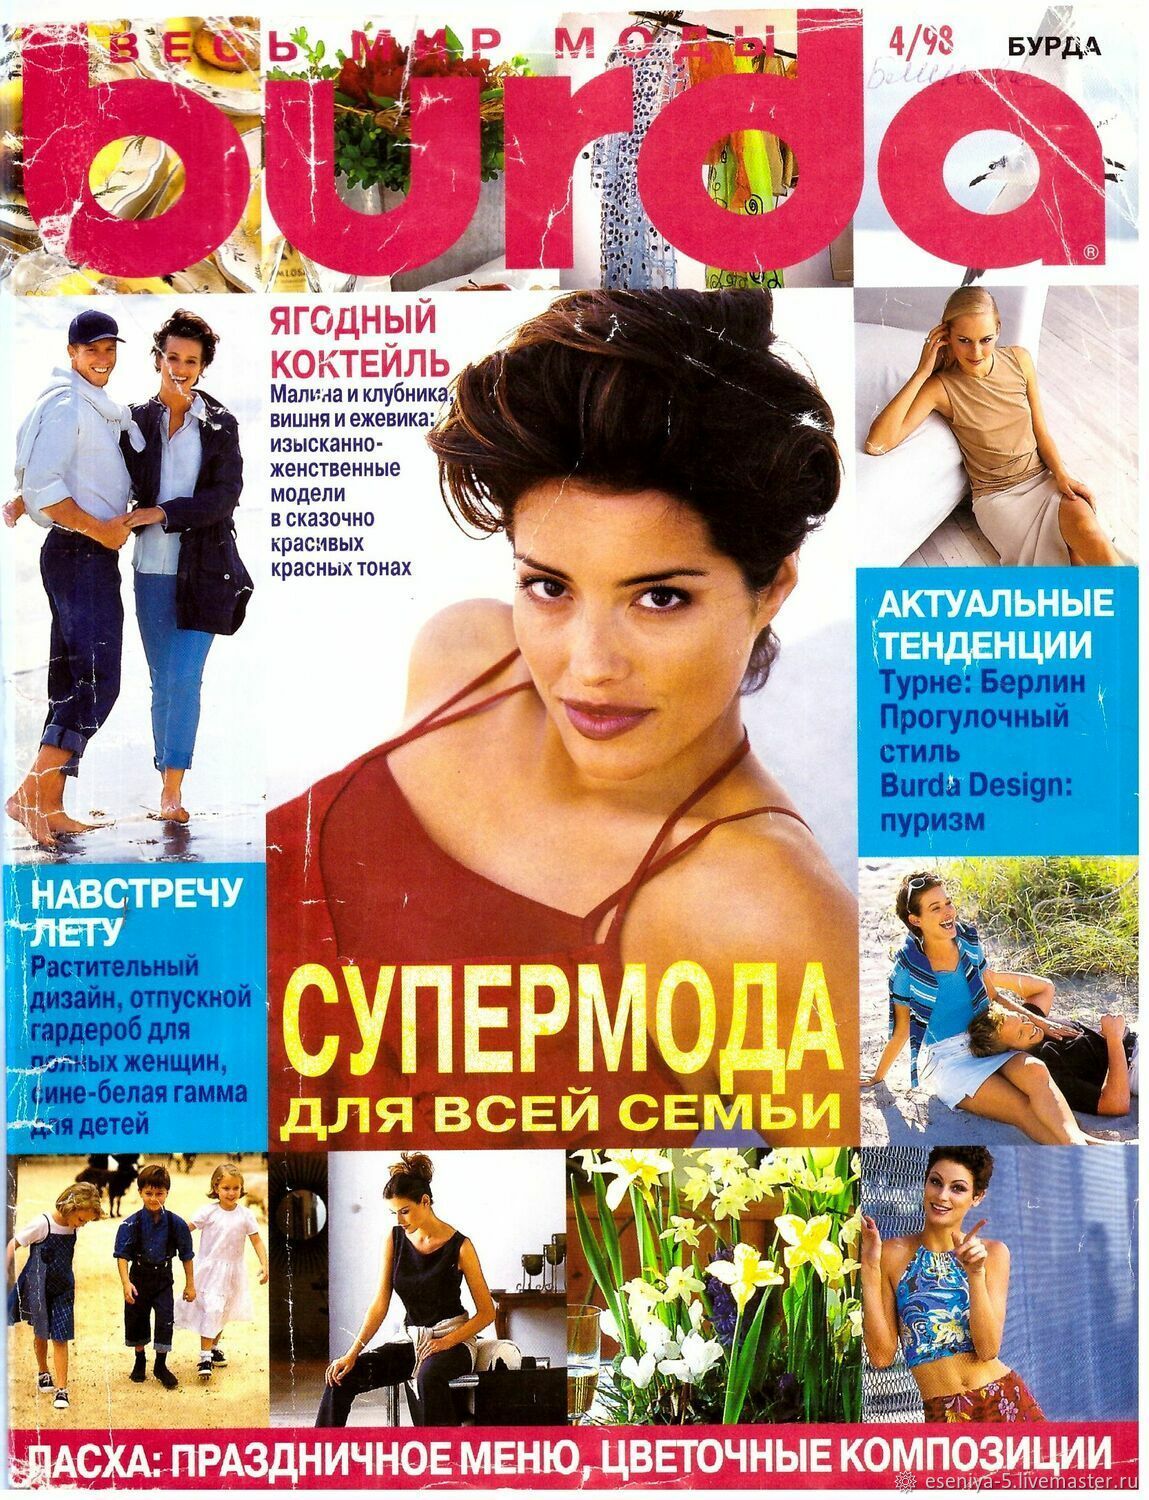 Burda Moden Magazine 4 1998 (April) without cover, Magazines, Moscow,  Фото №1